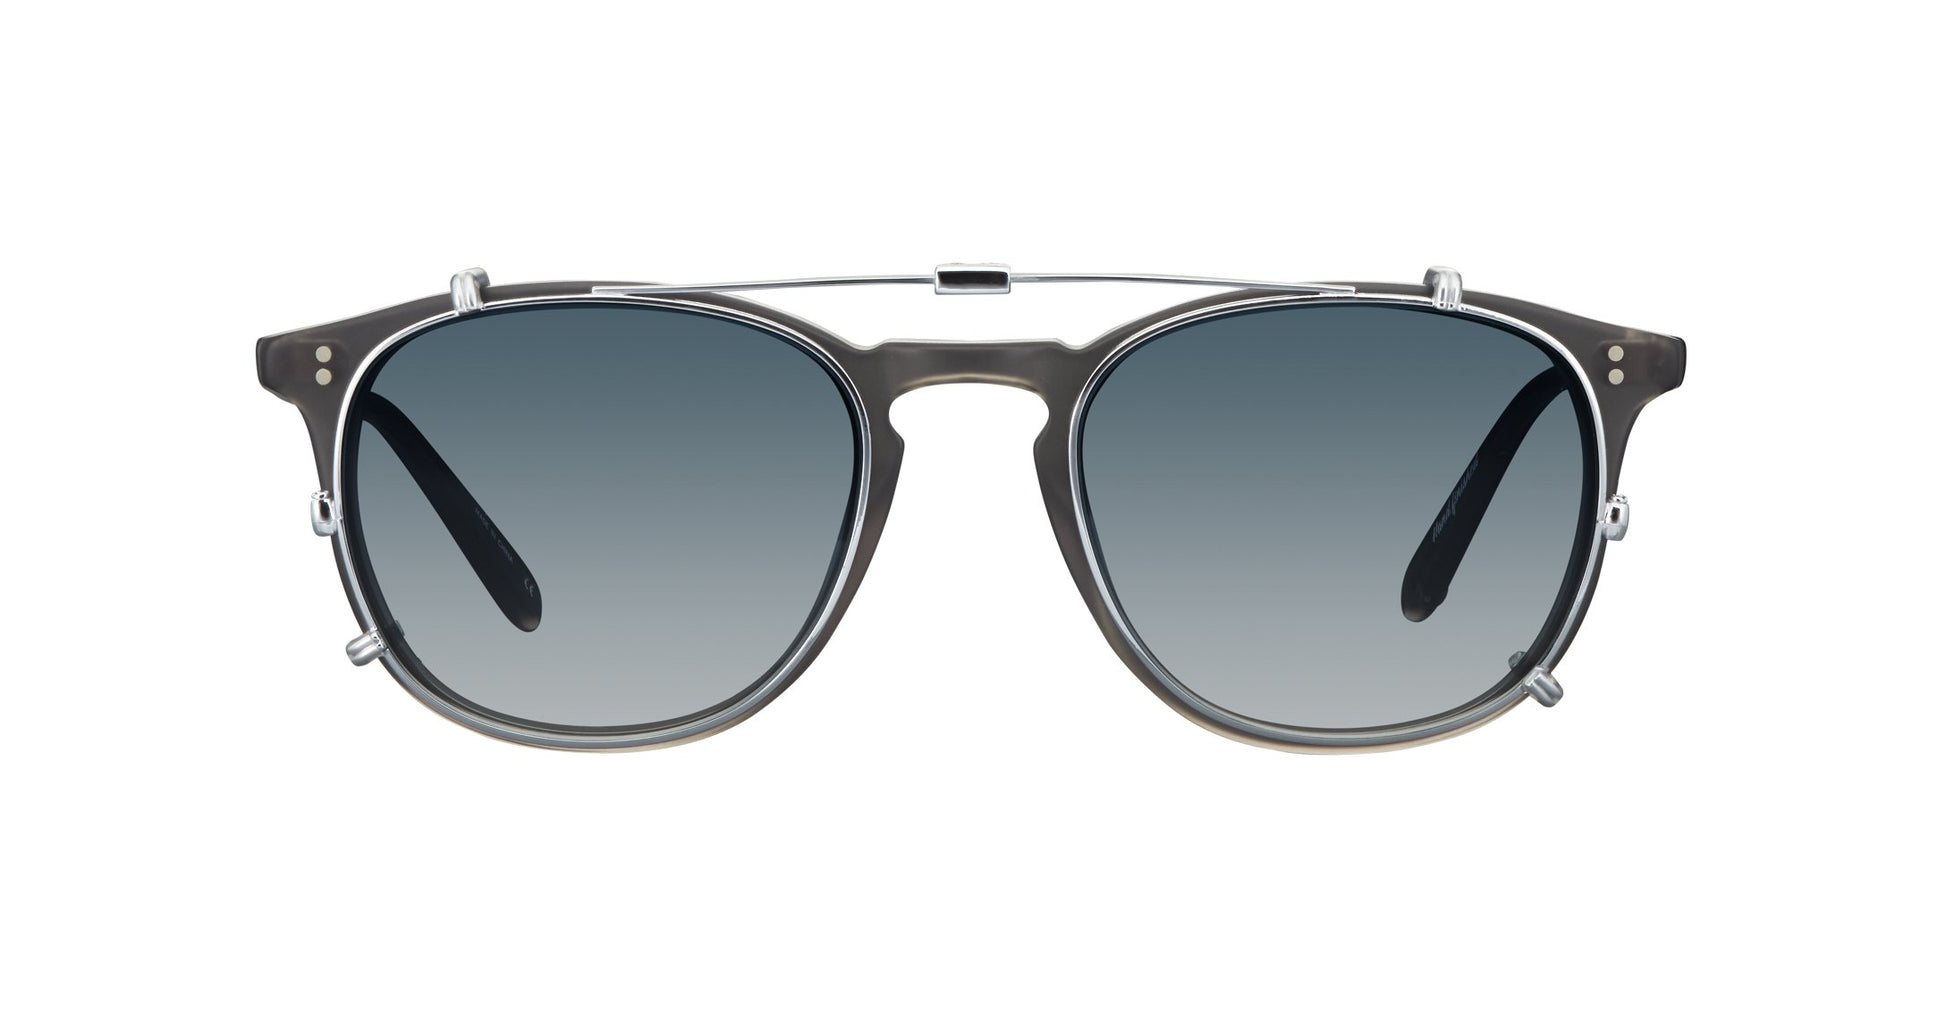 A folding sunglass clip in Silver created for the Garrett Leight California Optical Kinney eyeglass, available in two sizes and multiple colorways.